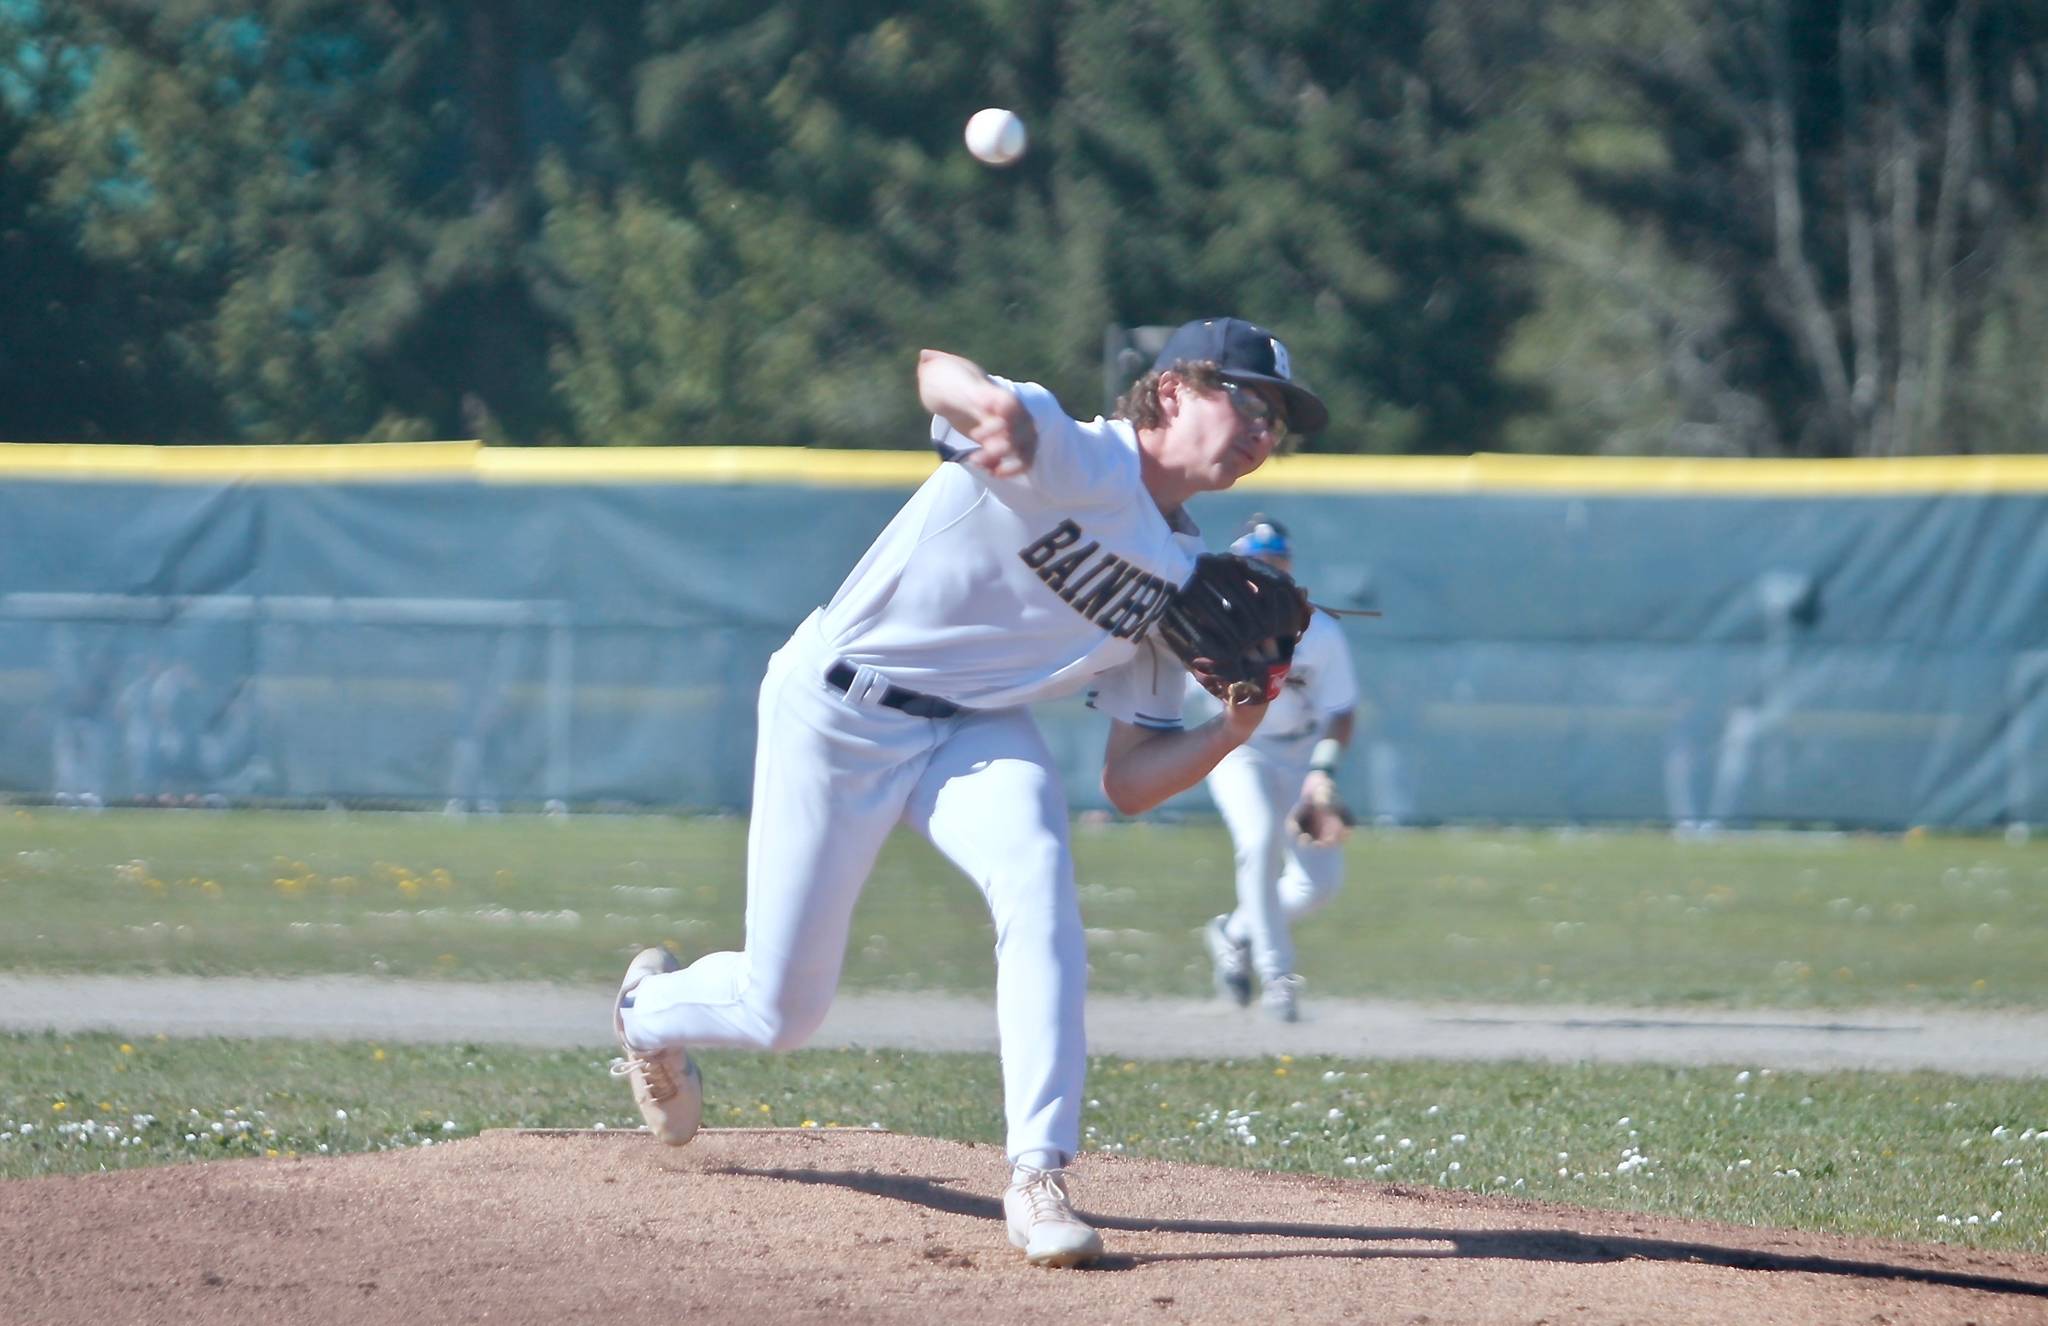 JR Ritchie threw five shutout innings for Bainbridge and also had two singles and a walk in four plate appearances against North Kitsap on Wednesday. (Mark Krulish/Kitsap News Group)